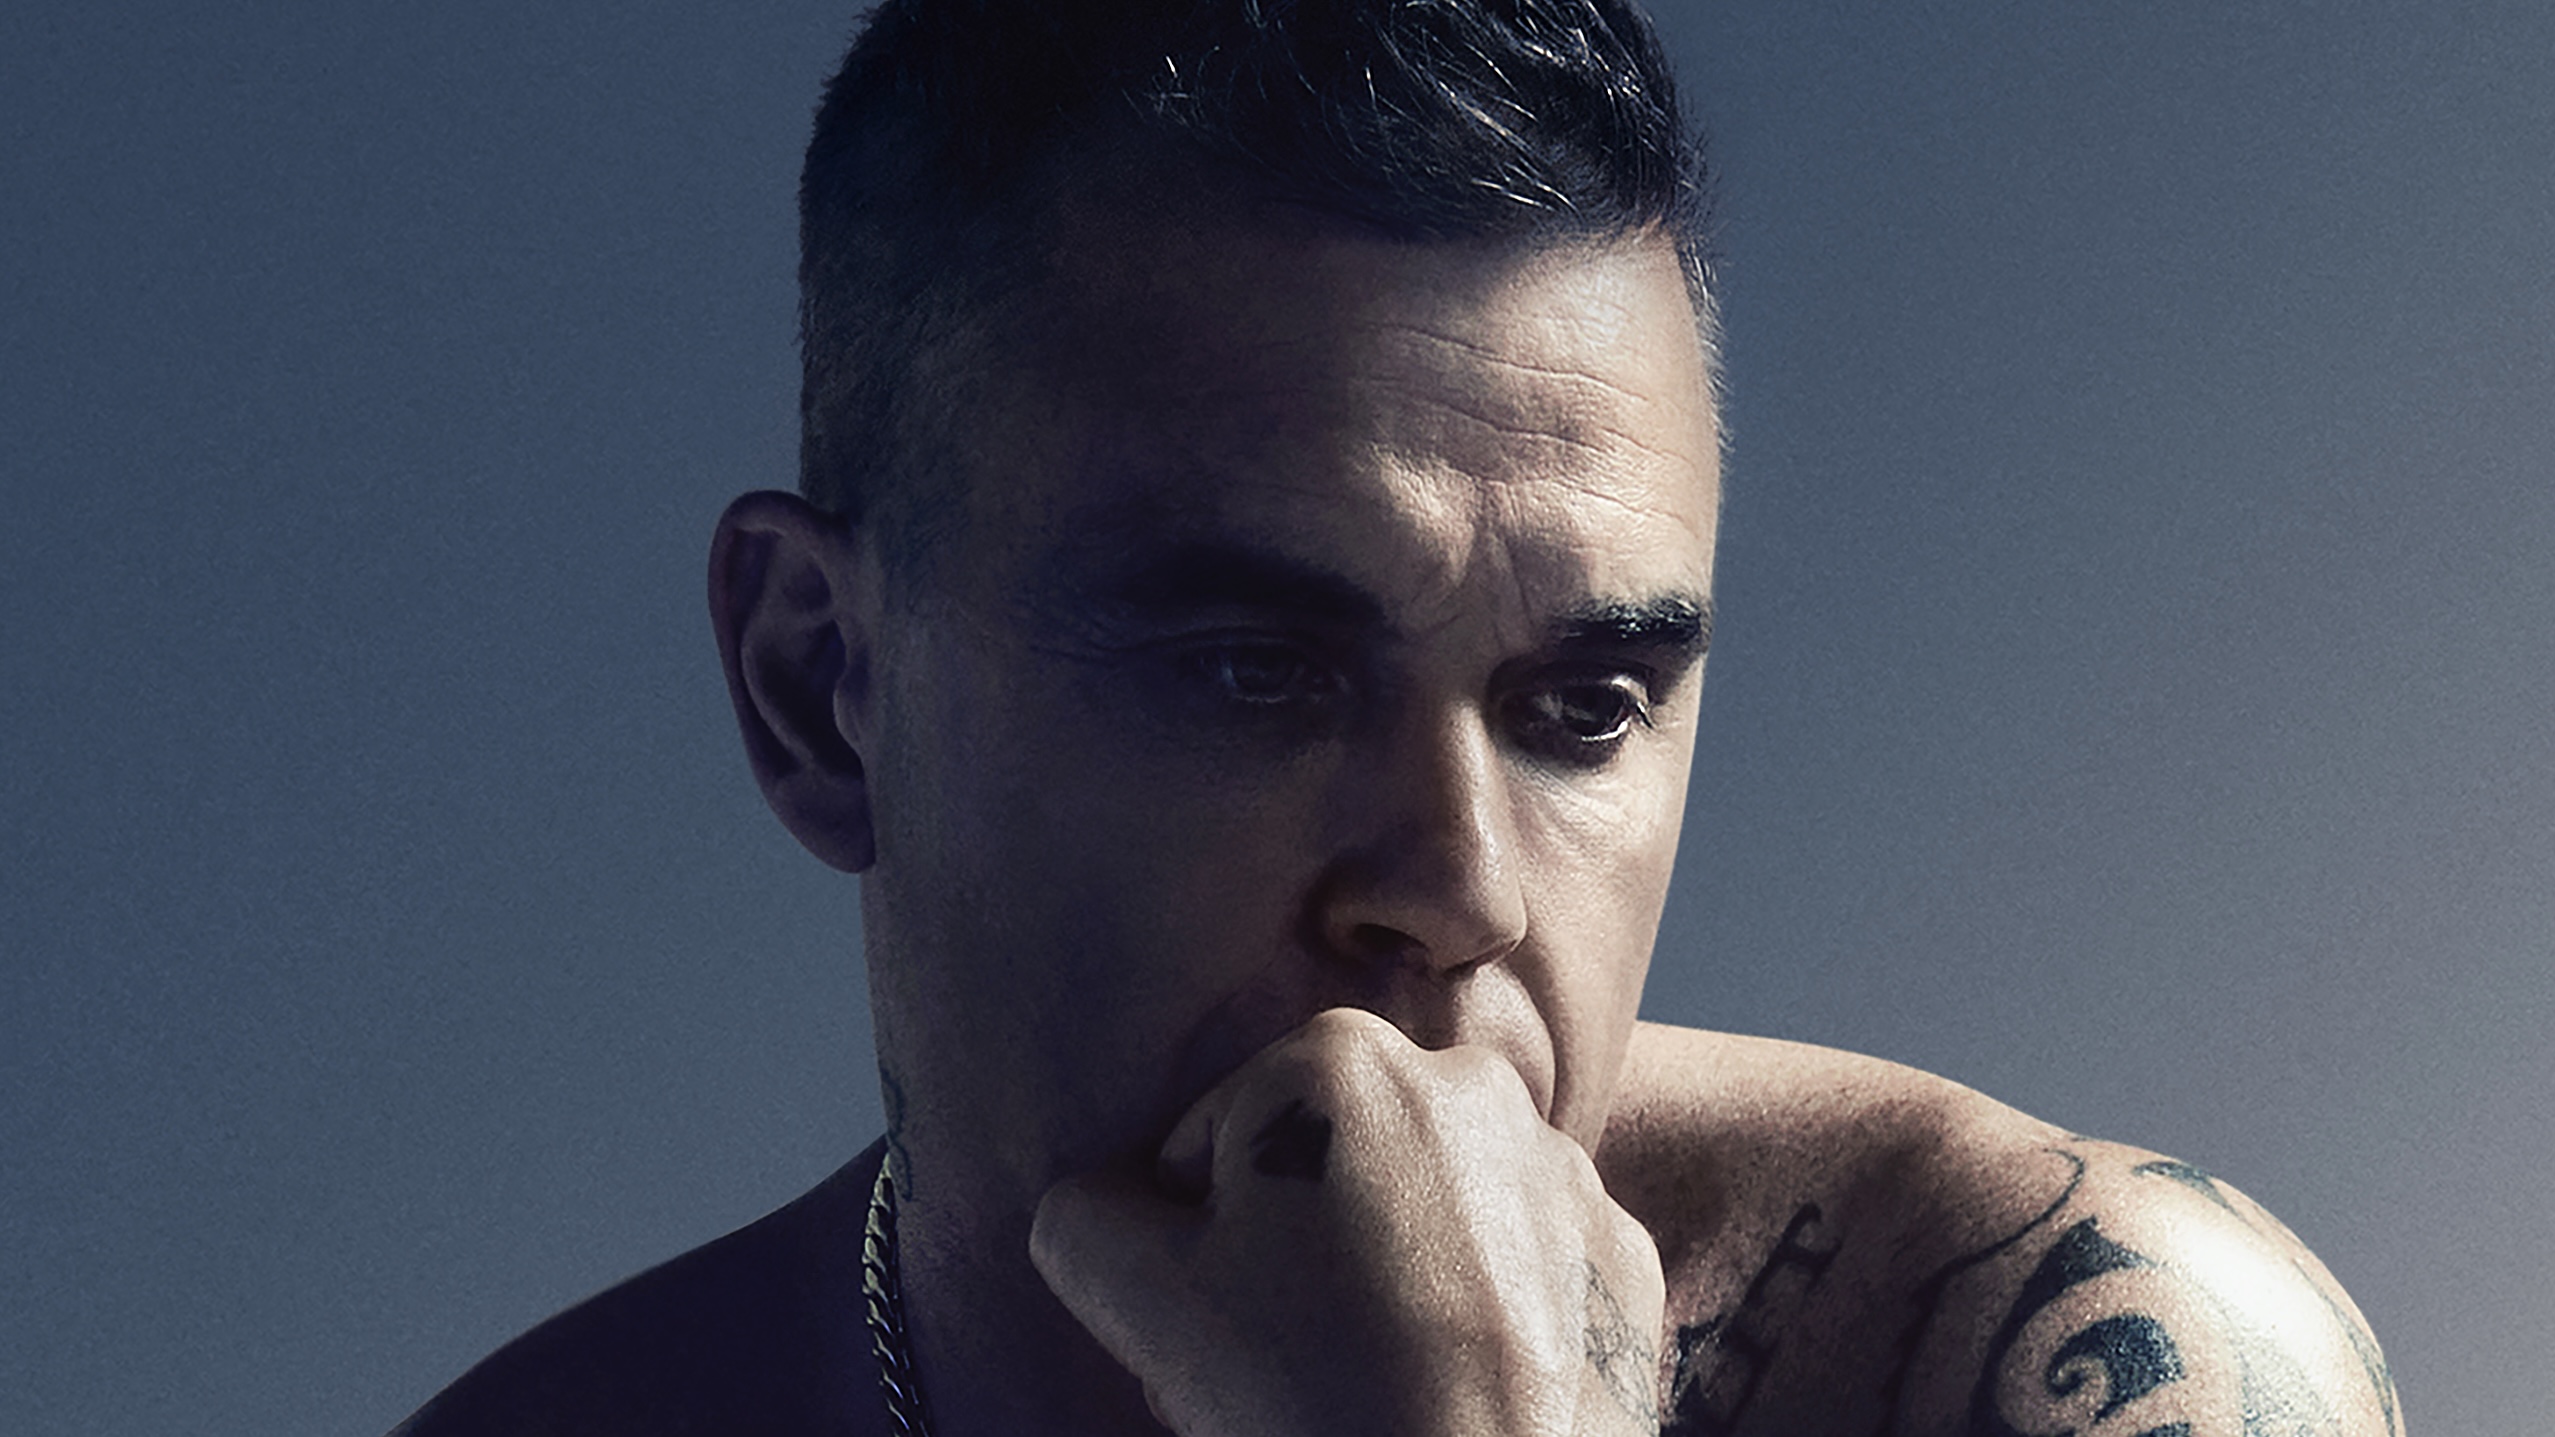 Robbie Williams shares music video for 'Lost' from 'XXV' greatest hits  collection - Retro Pop | The Music Magazine: Latest News, Interviews,  Reviews, Features & Exclusive Content